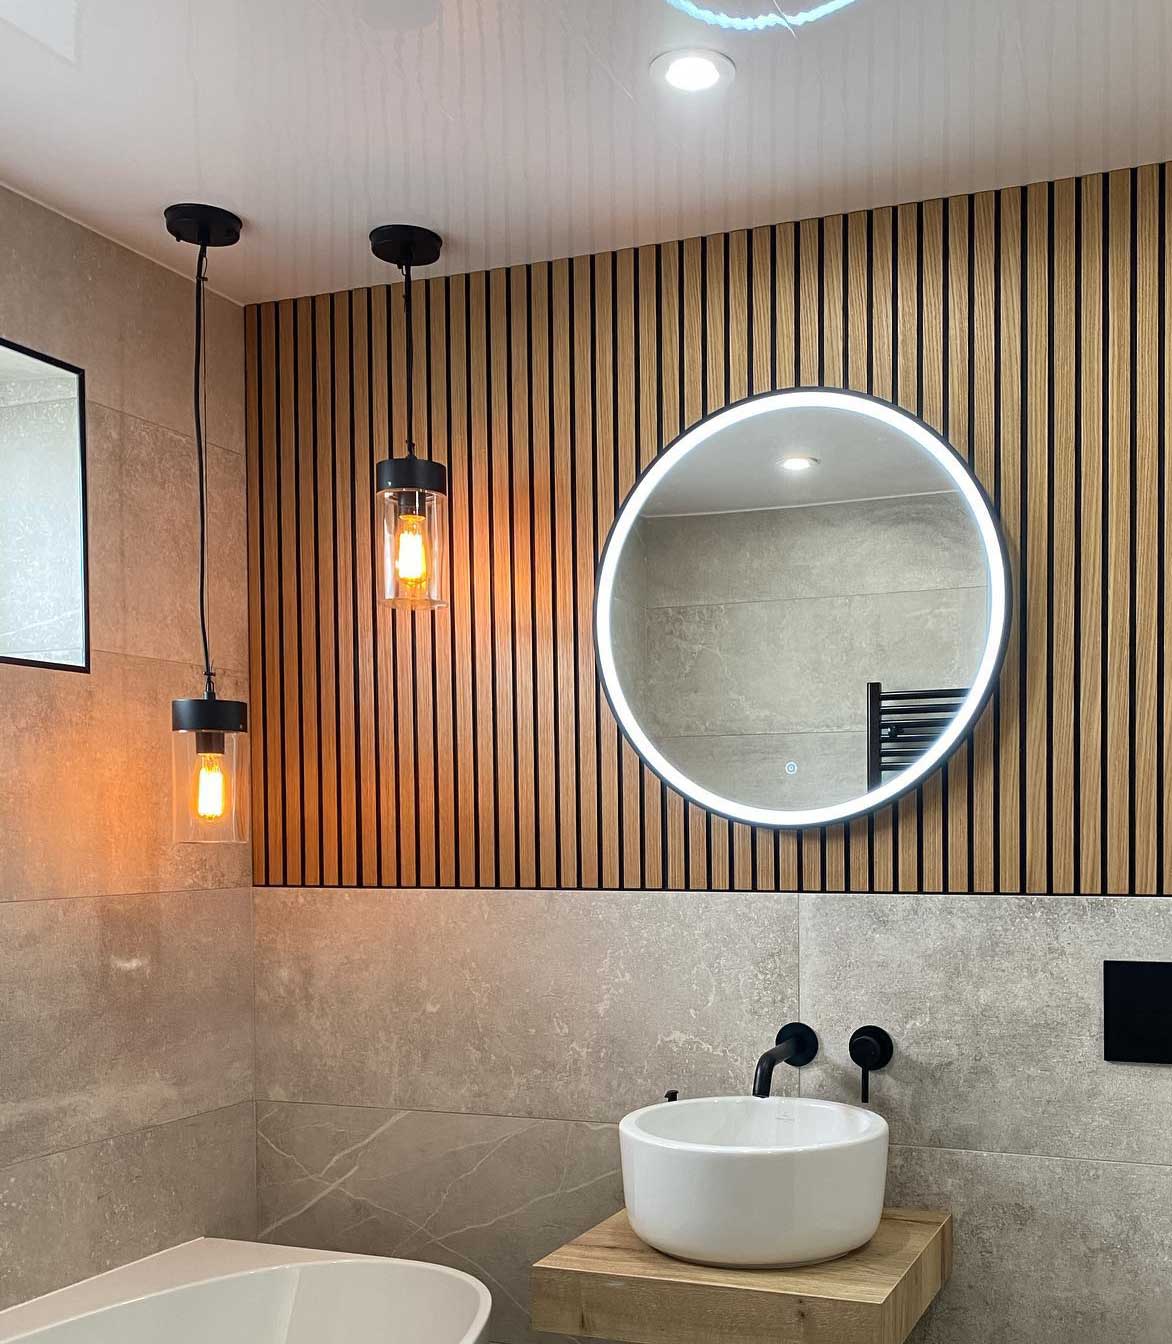 Bathroom with different lights